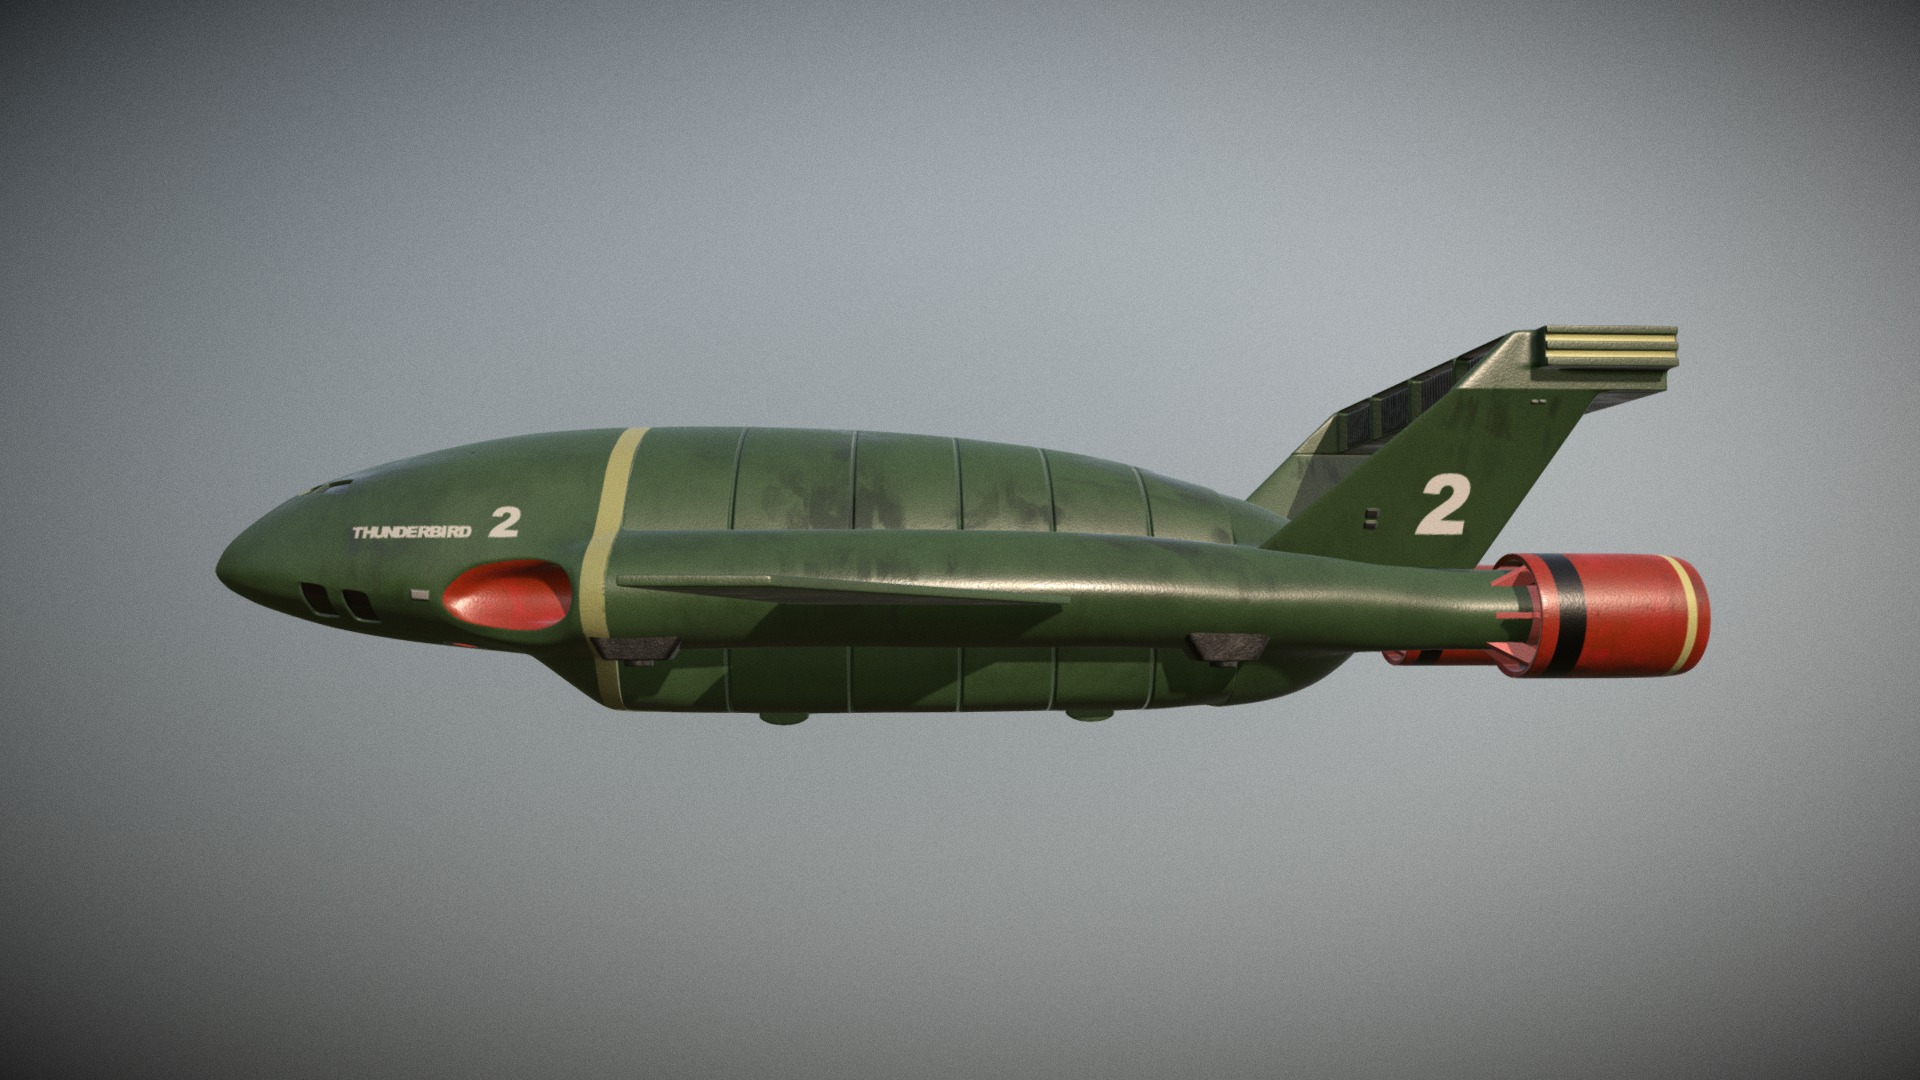 3D model Thunderbird 2 - This is a 3D model of the Thunderbird 2. The 3D model is about a green and white military plane.